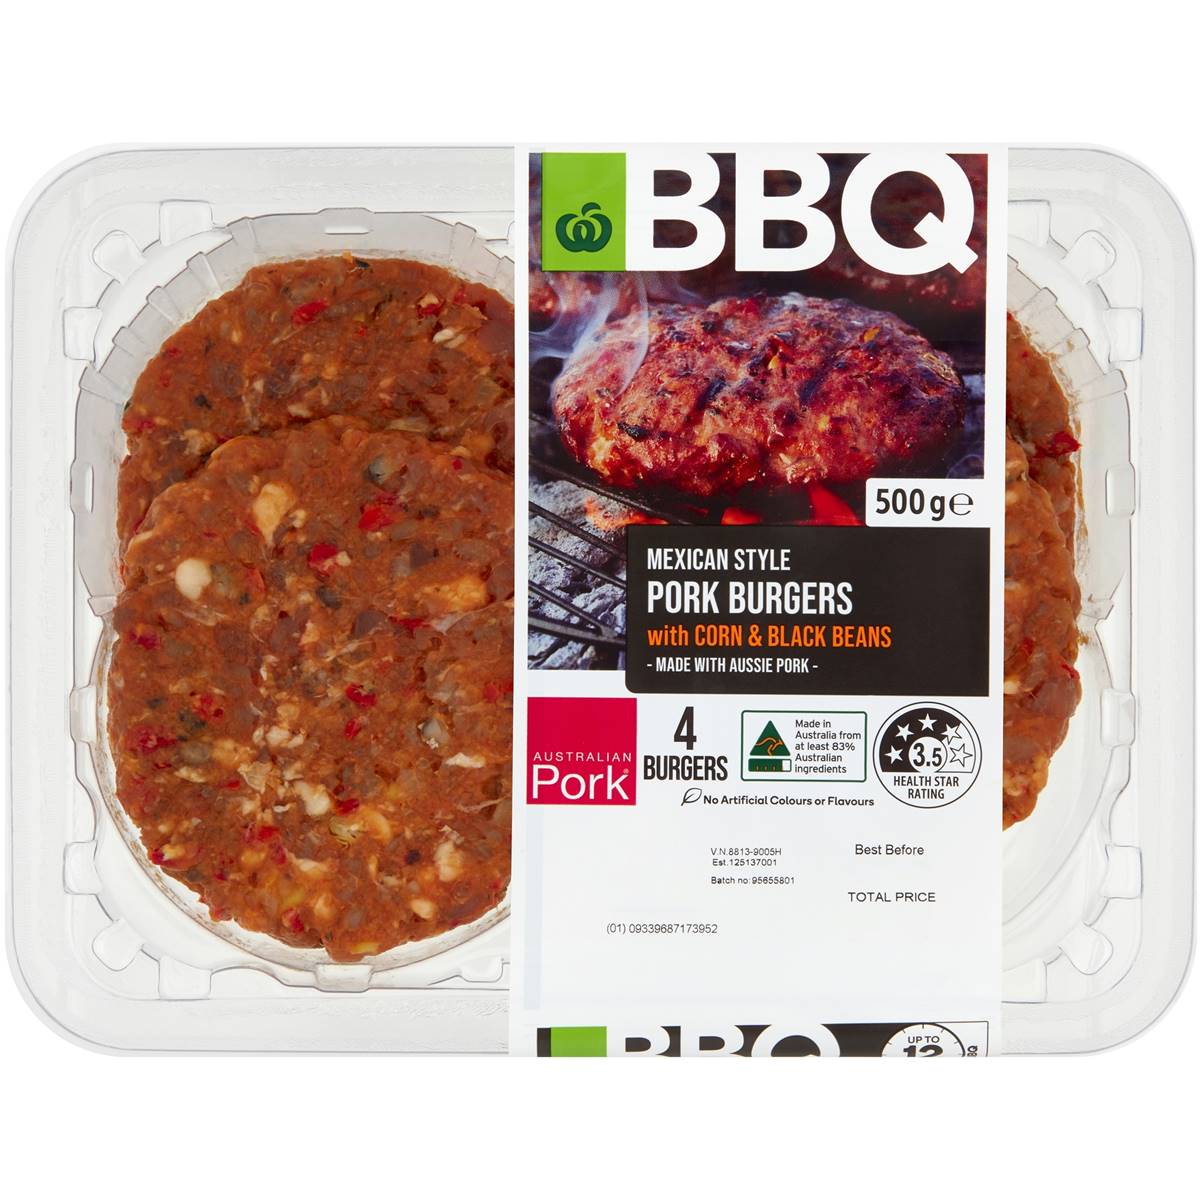 Calories in Woolworths Bbq Mexican Style Pork Burgers Corn & Black Beans